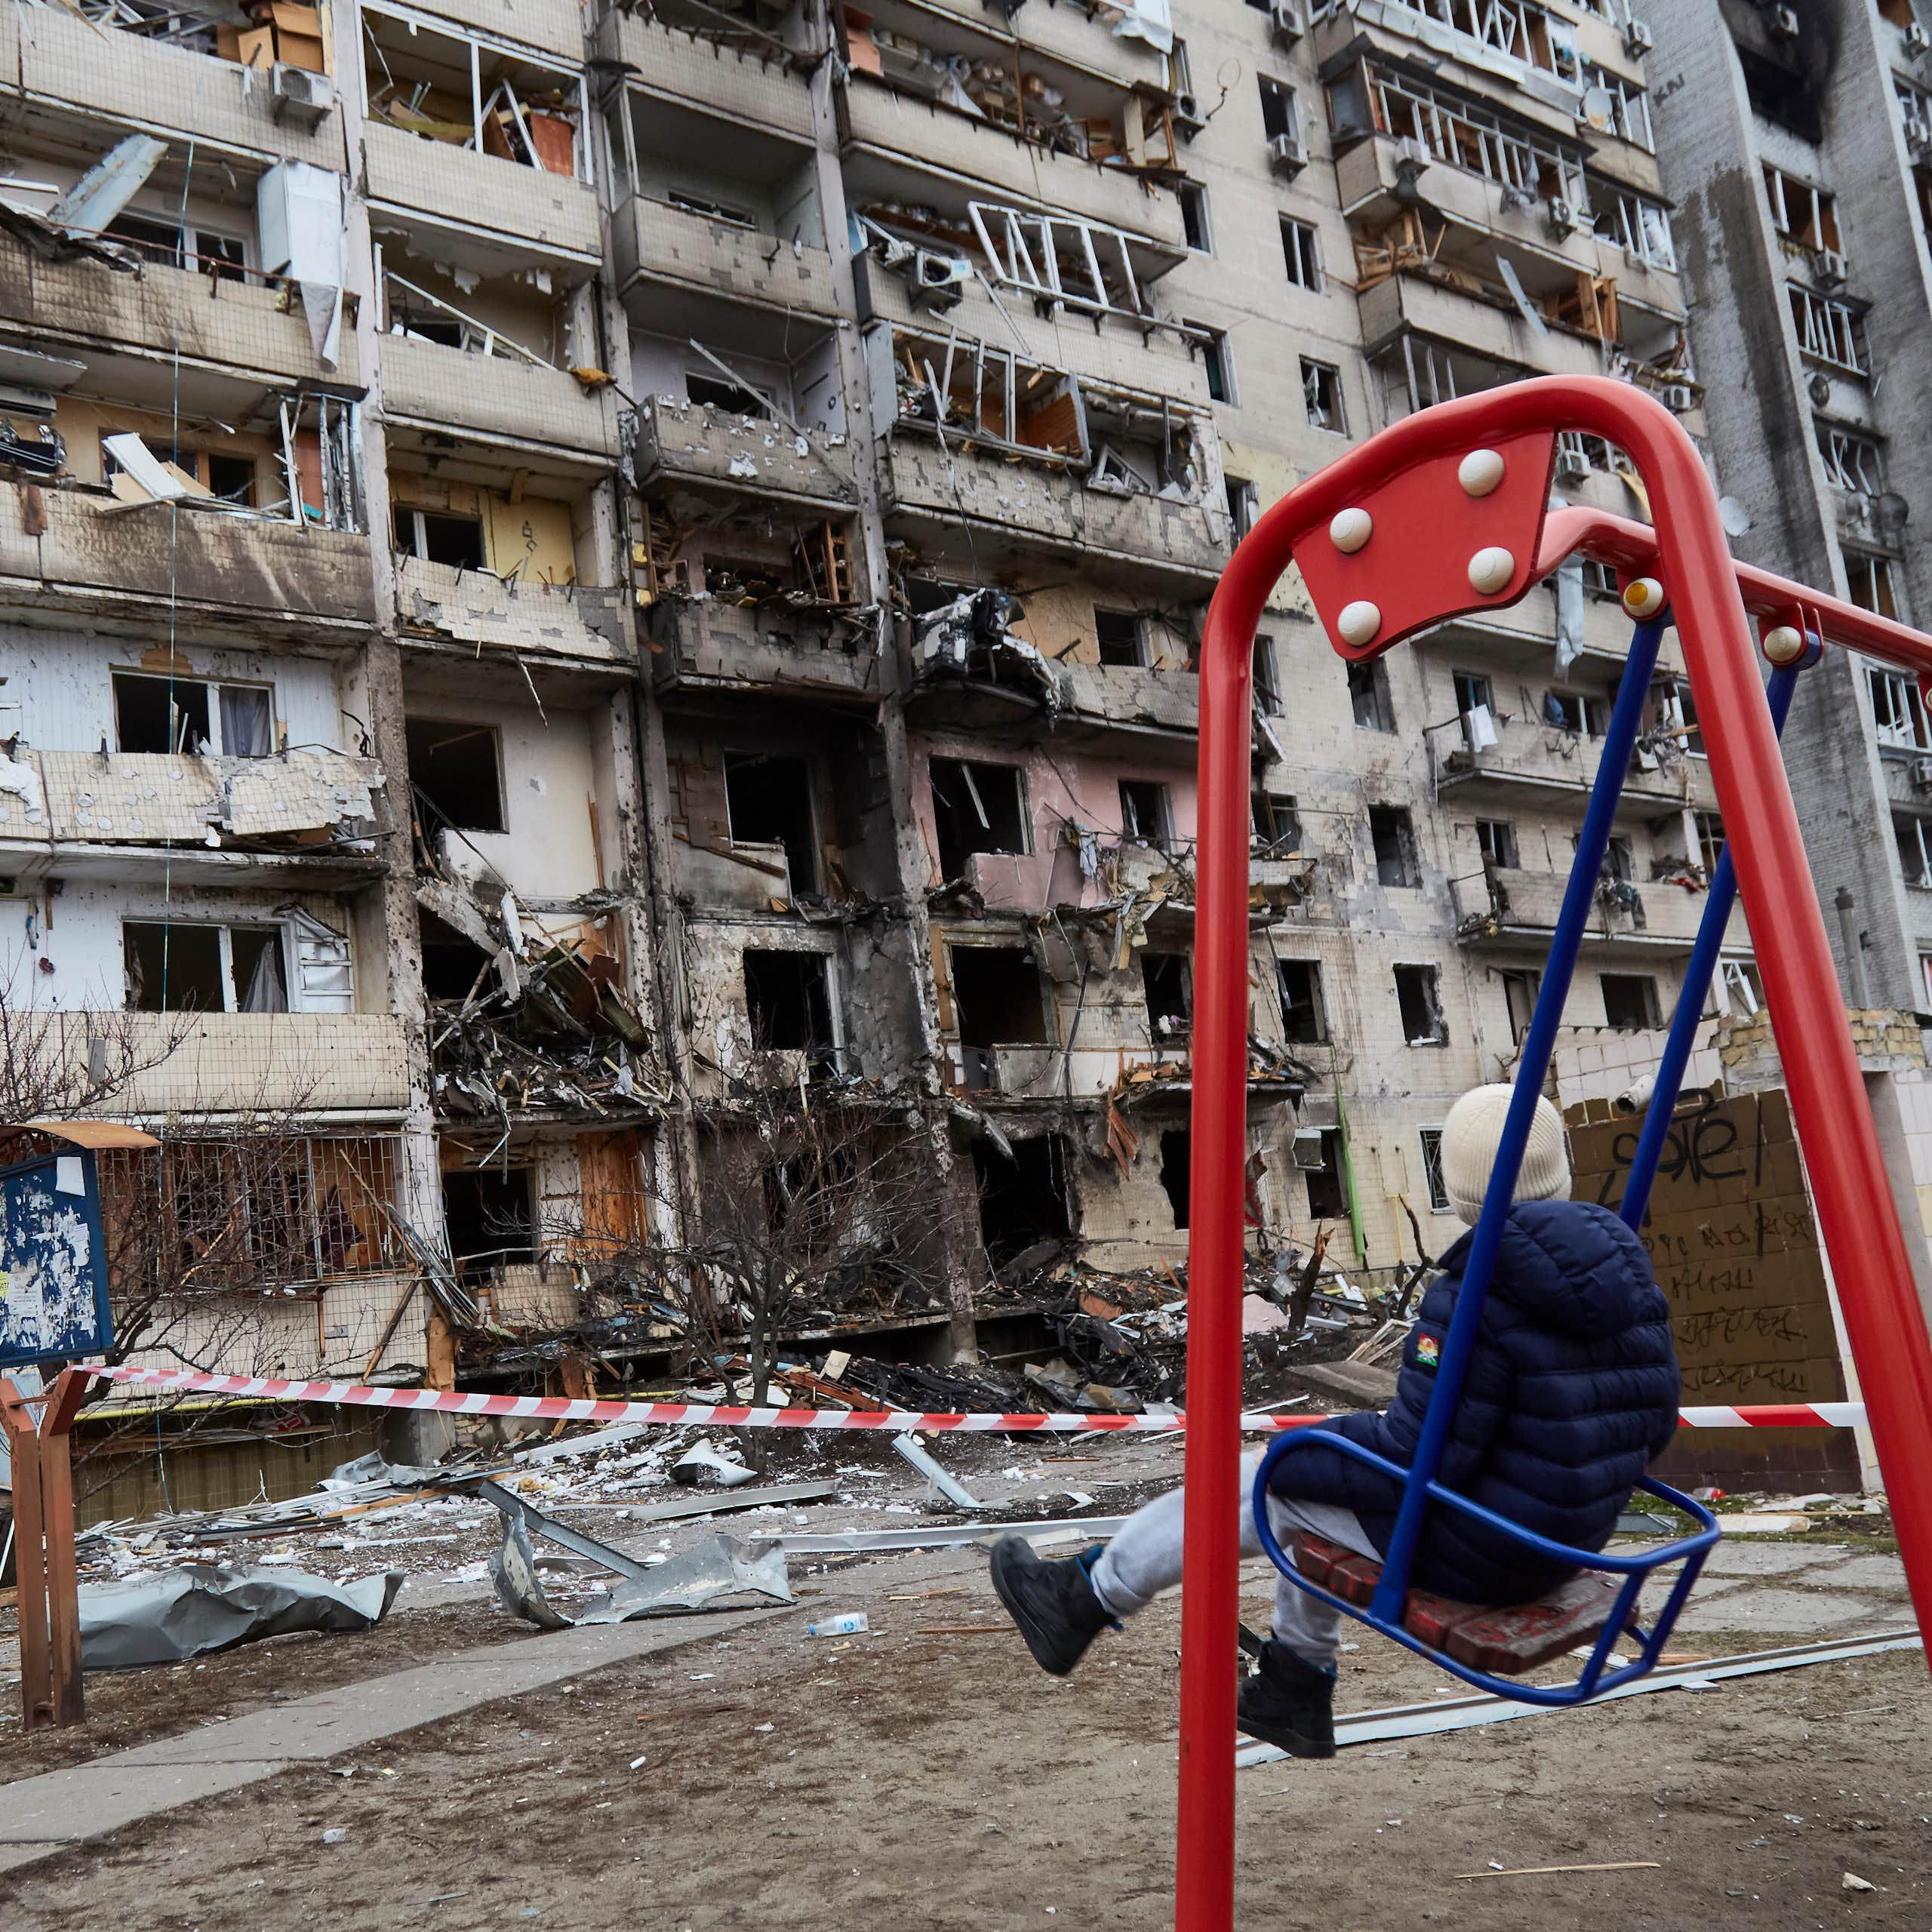 The price of rebuilding Ukraine goes up each day − but shirking the bill will cost even more